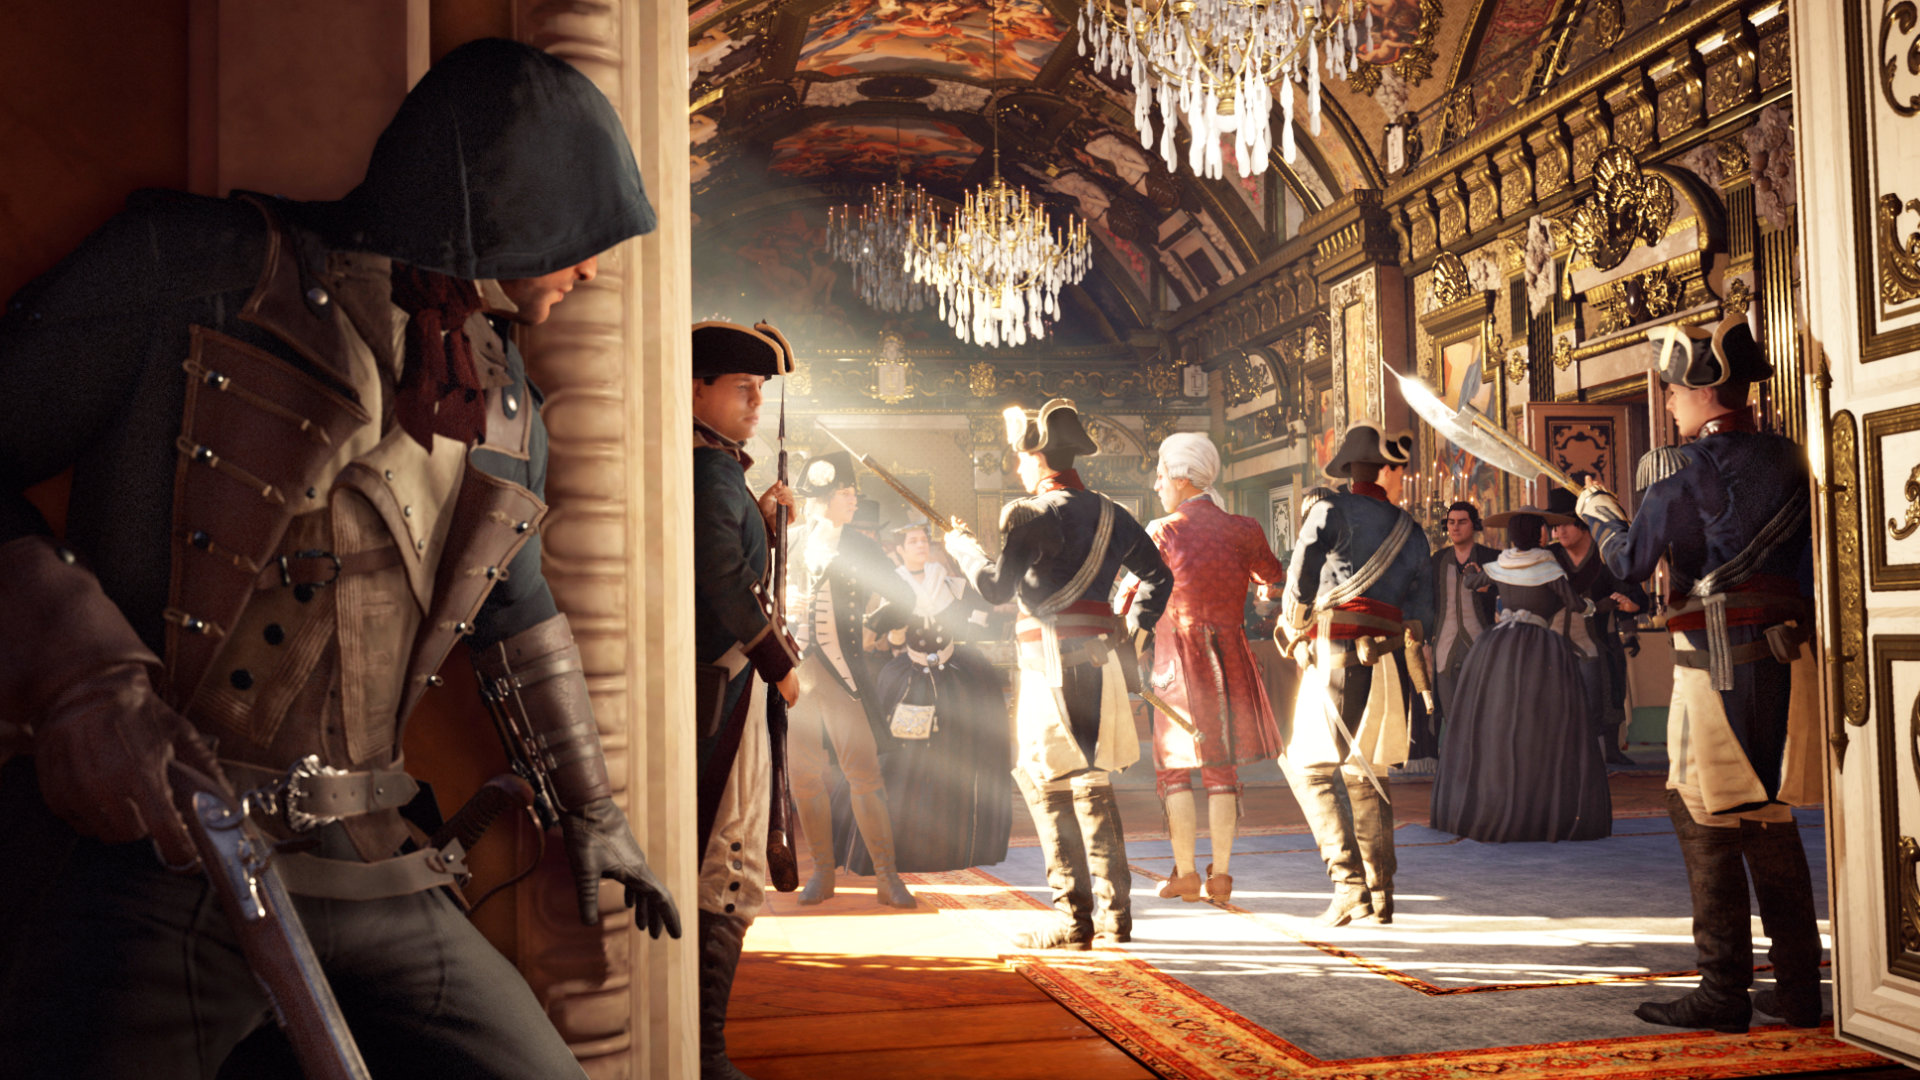 Best Assassin's Creed Games (According To Metacritic)